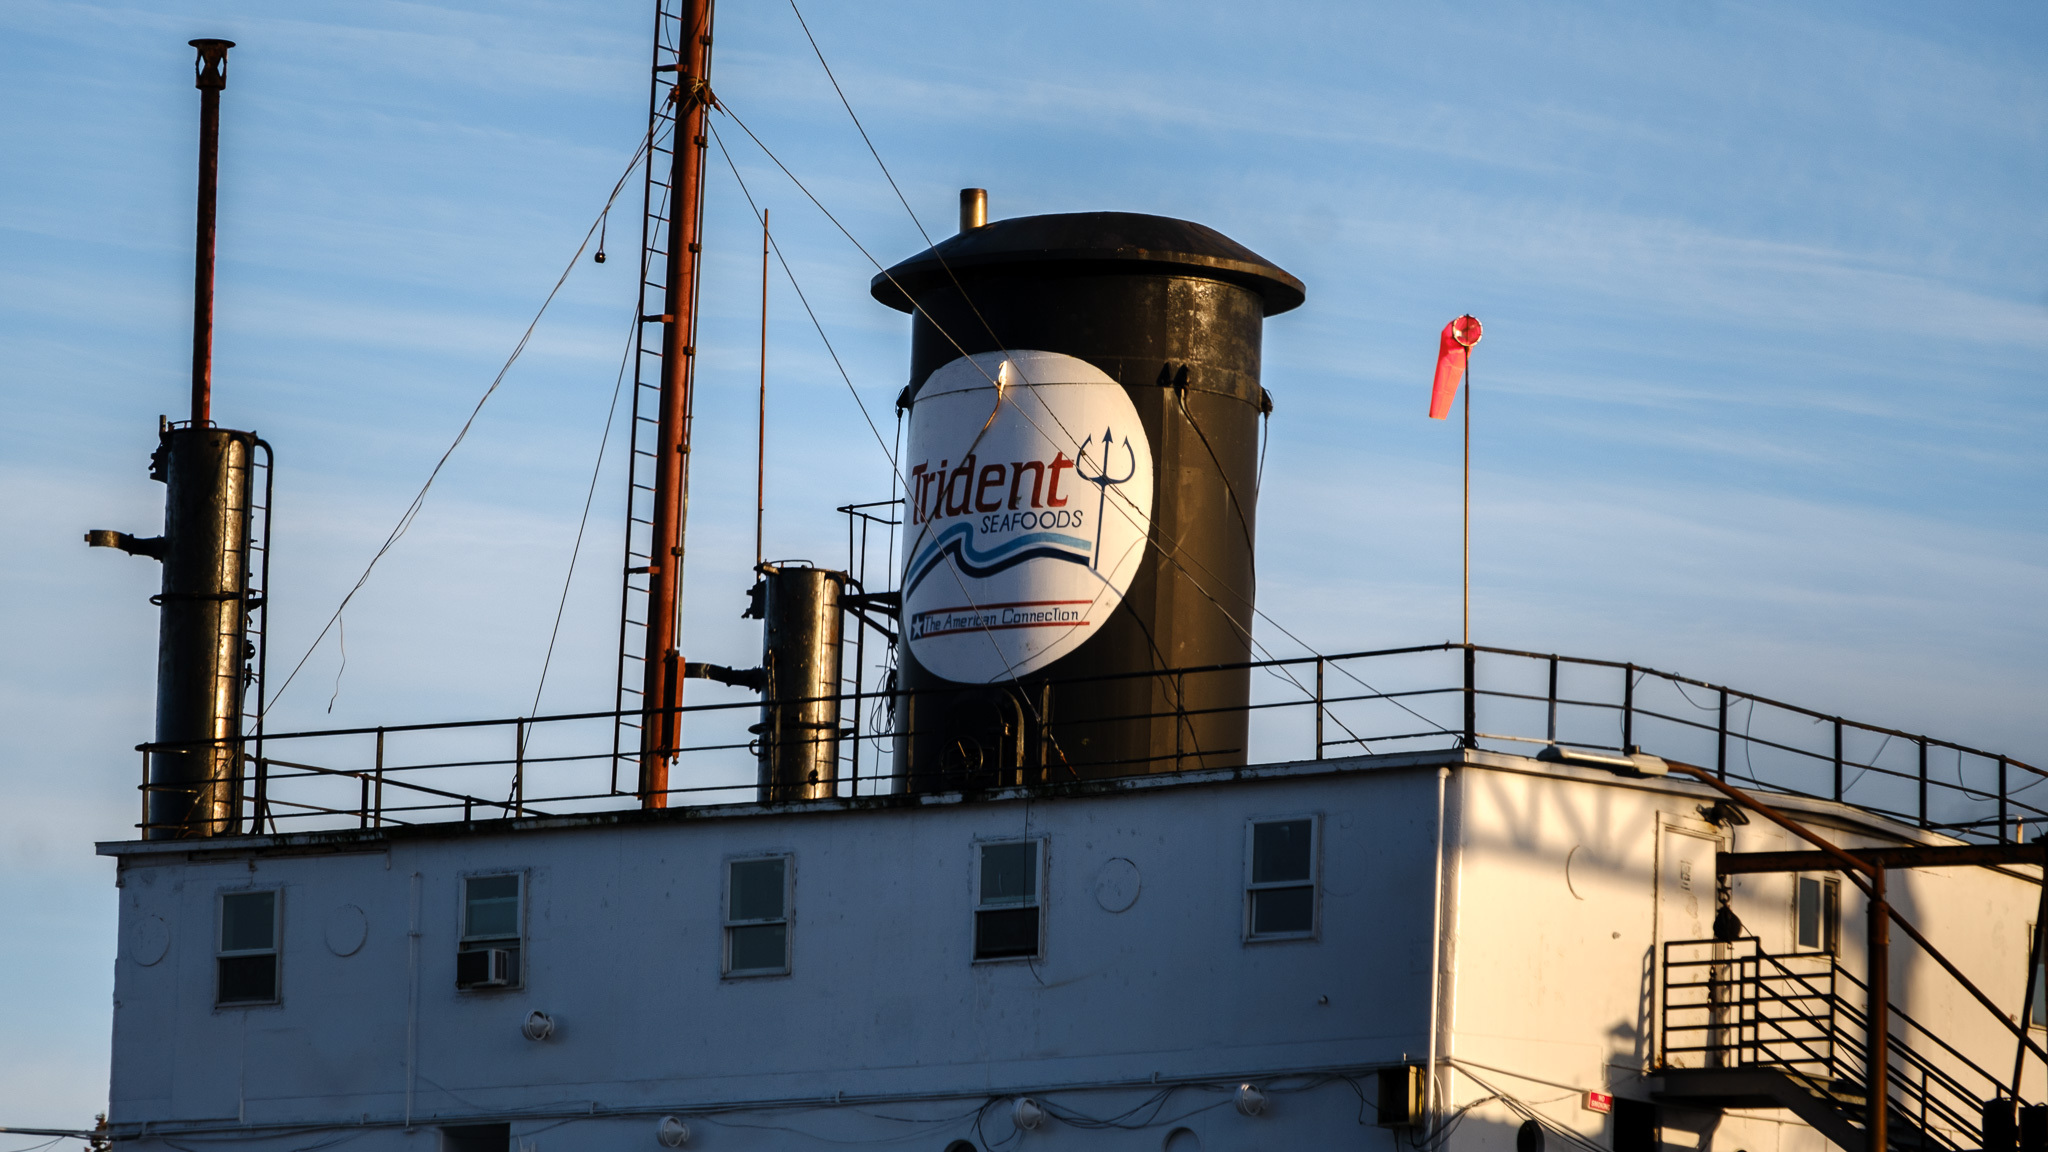 a square building with a large black cylinder, possibly for exhaust, that reads "Trident Seafoods"